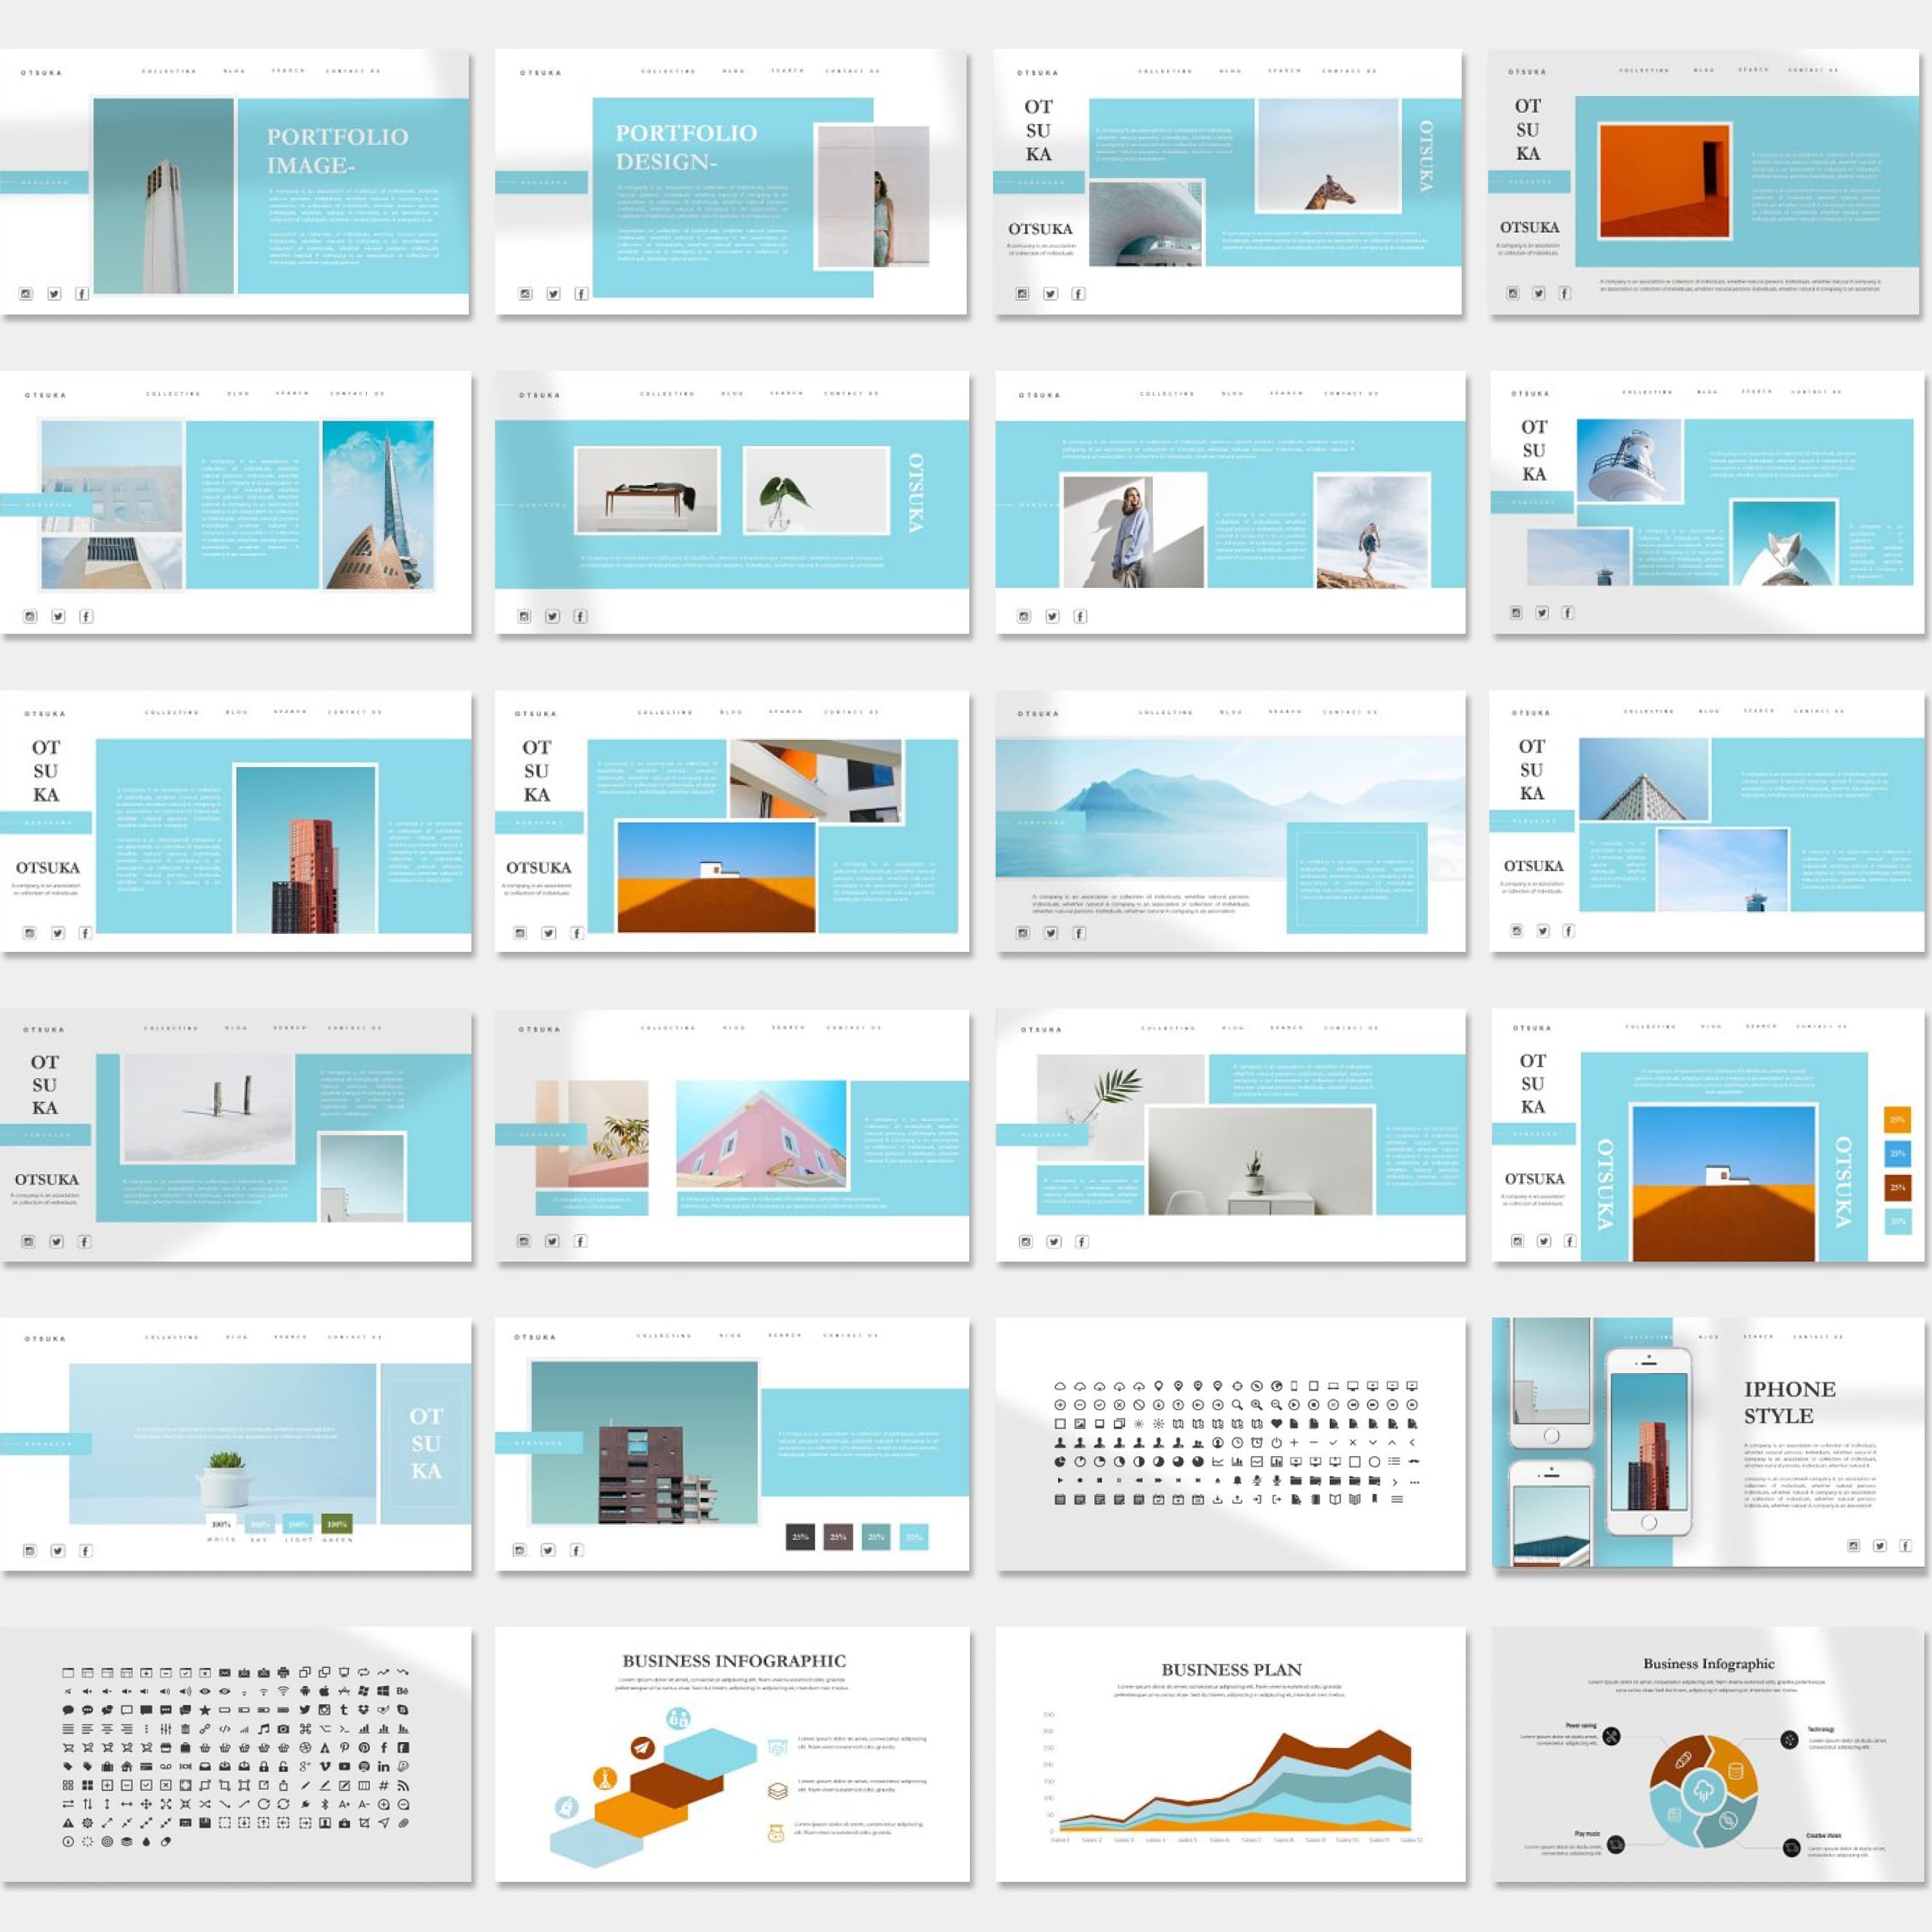 OTSUKA | Powerpoint Template created by Barland Design.